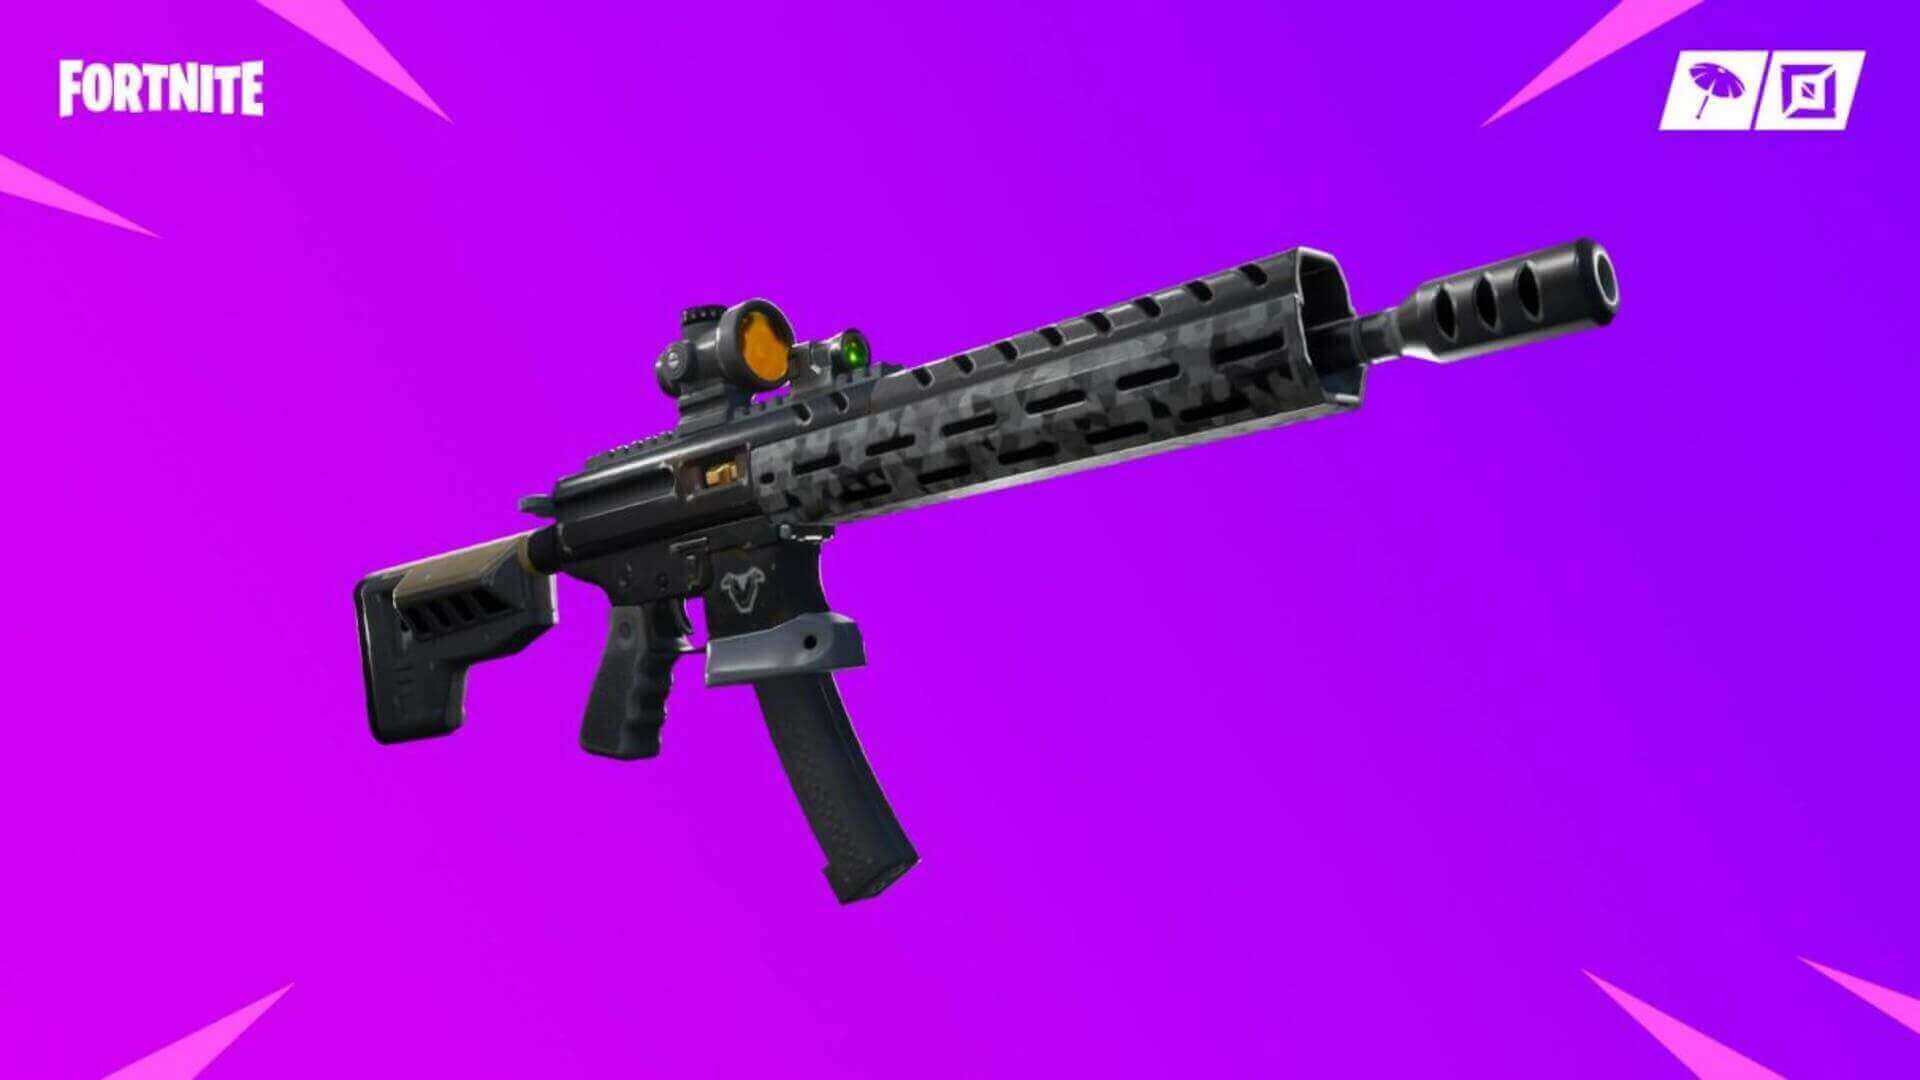 Weapon accessories may be coming to Fortnite